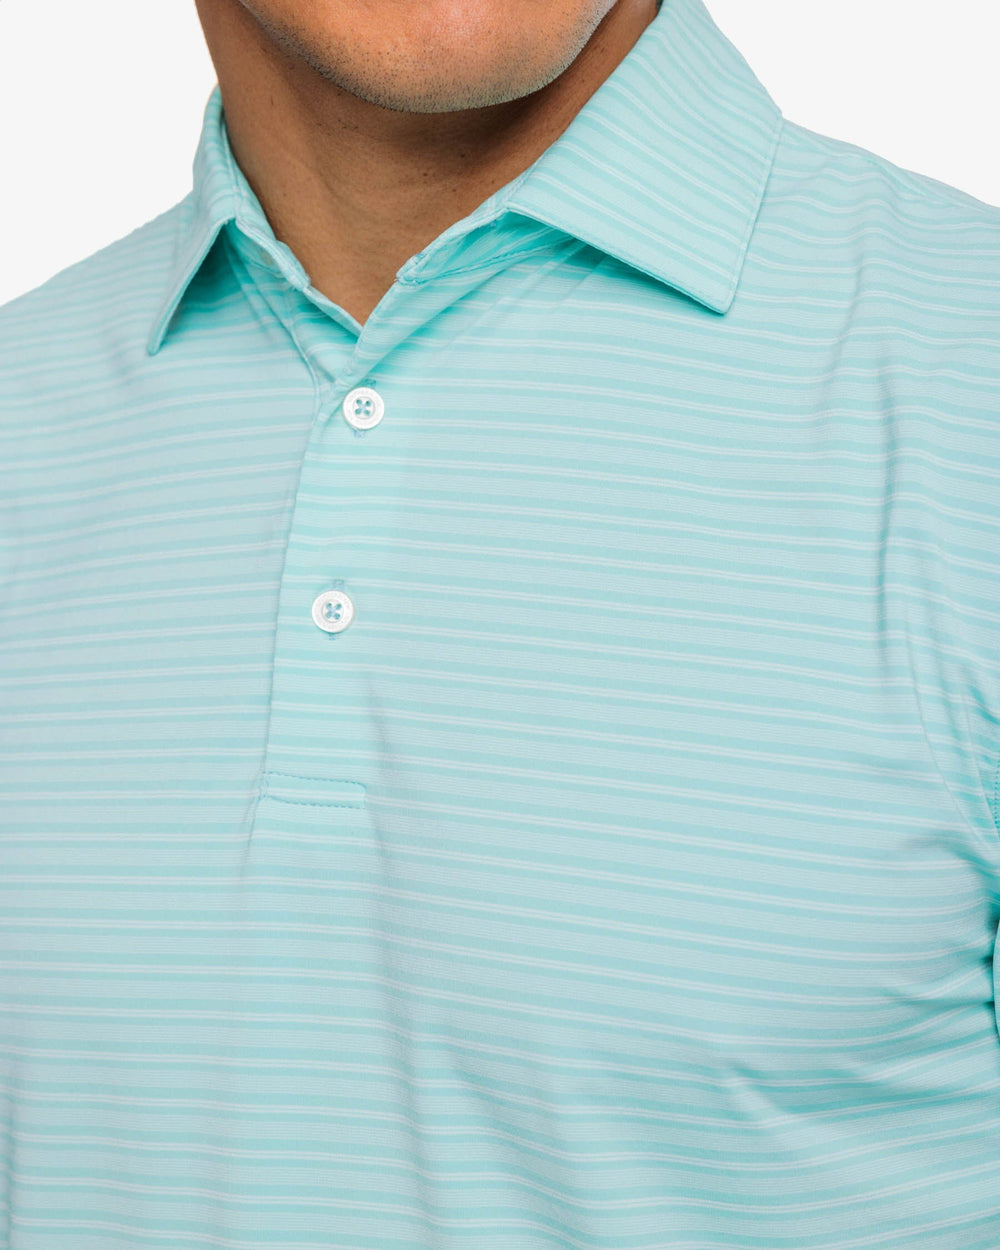 The detail view of the Southern Tide brrr°®-eeze Bowen Stripe Performance Polo Shirt by Southern Tide - Mint